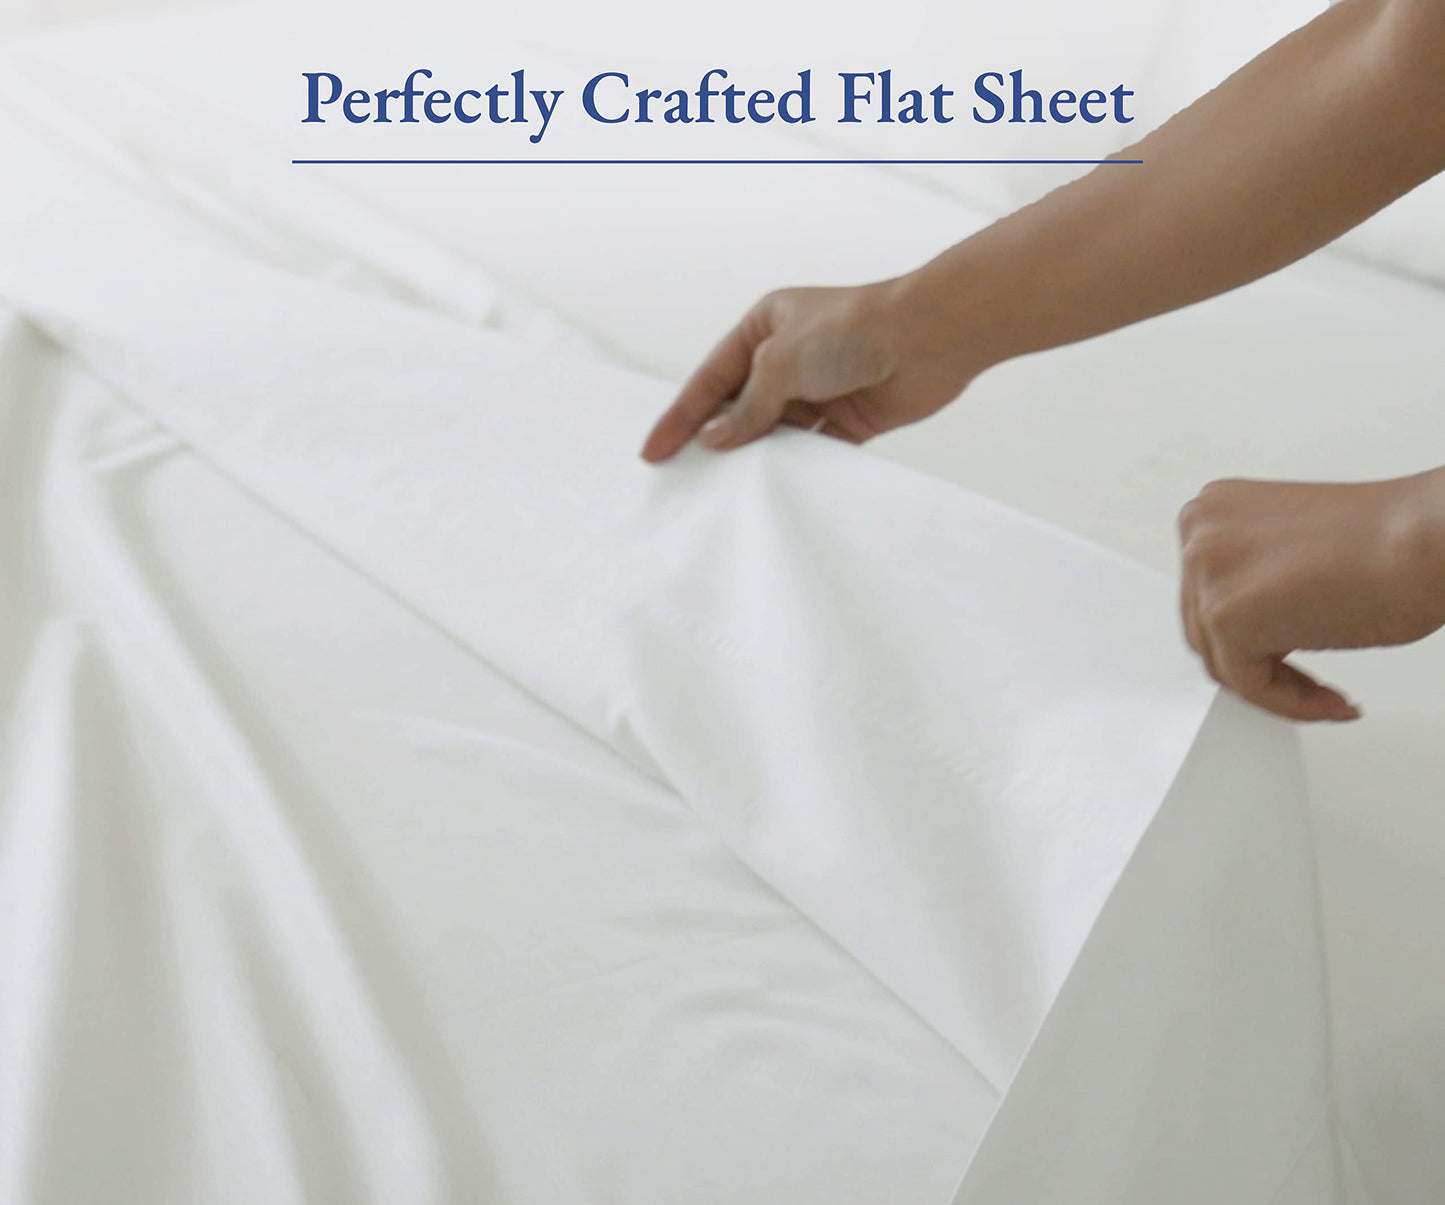 California Design Den King Size Flat Sheet, Soft 400 Thread Count 100% Cotton Sheet, Sateen, Cooling & Breathable Bed Sheets, White King Sheets, Top Sheets, Single Only (Bright White)